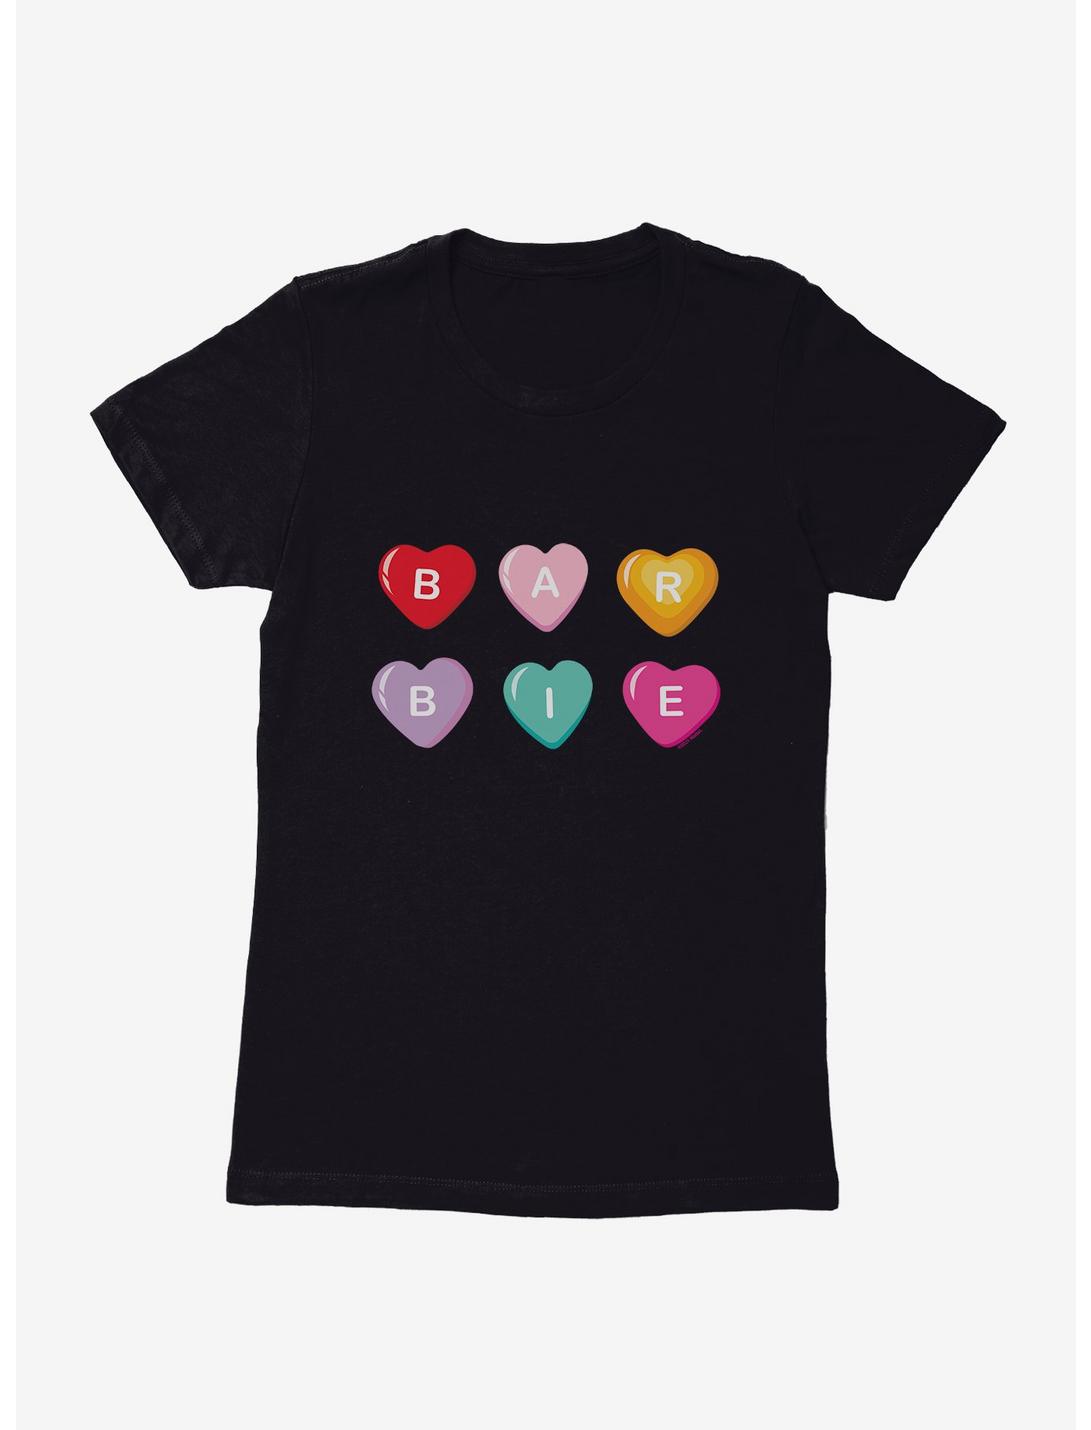 Barbie Valentine's Day Candy Heart Womens T-Shirt, BLACK, hi-res